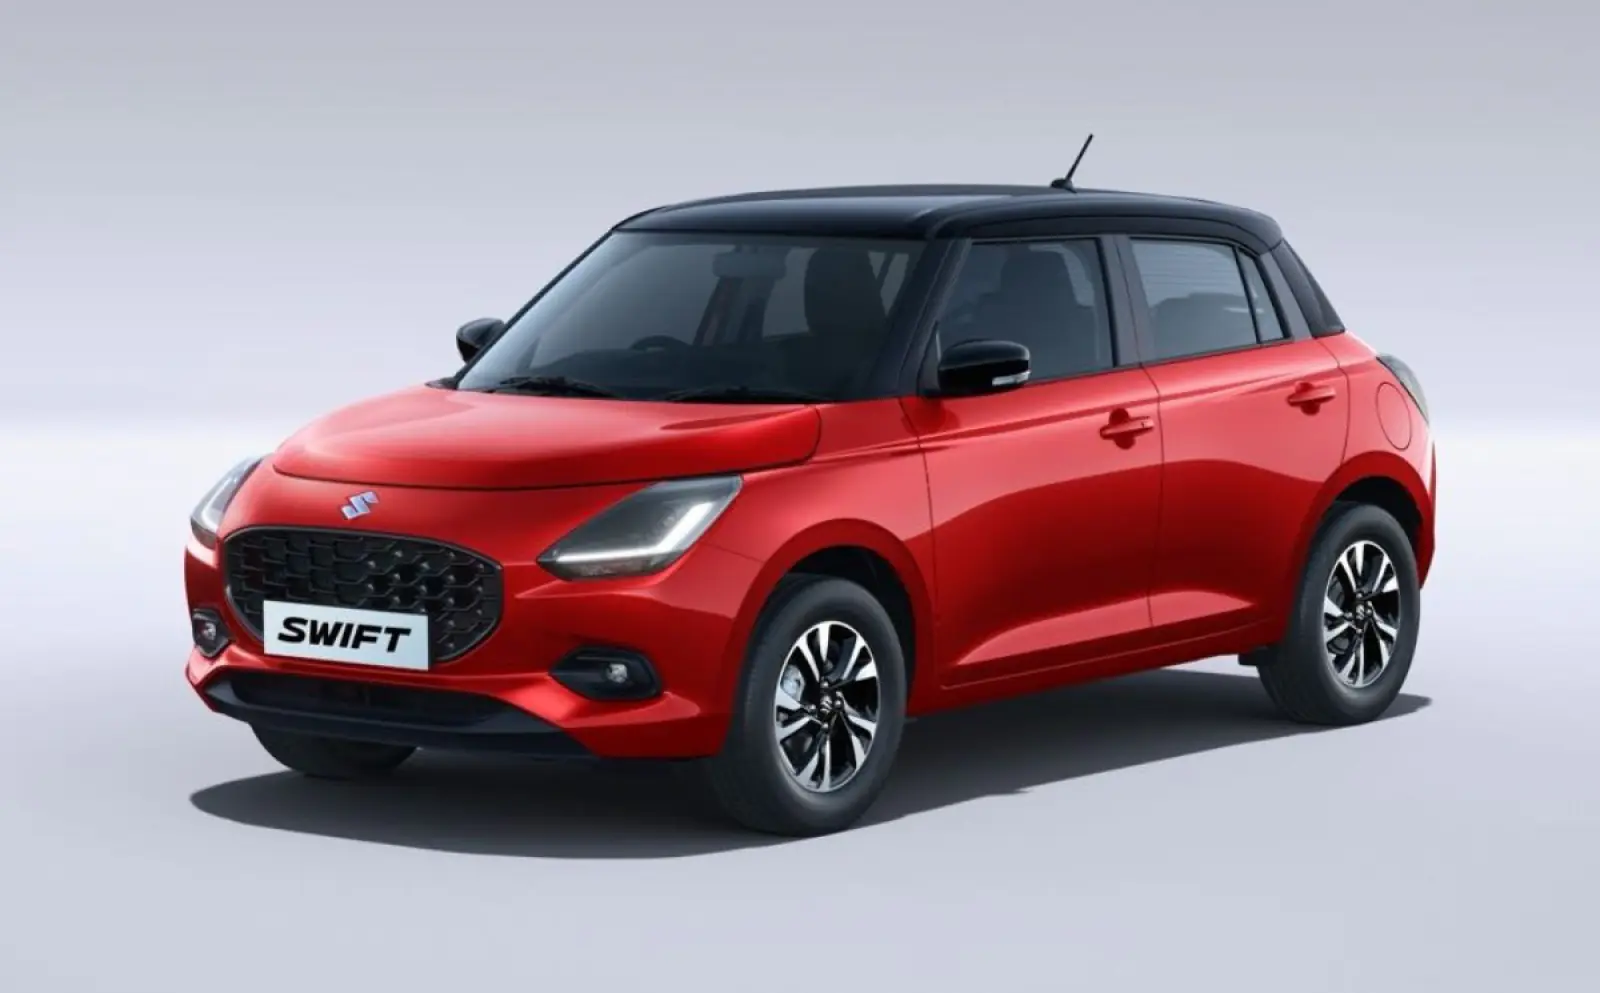 Maruti Swift crosses 30 lakh sales mark, know what are the features and what is the price